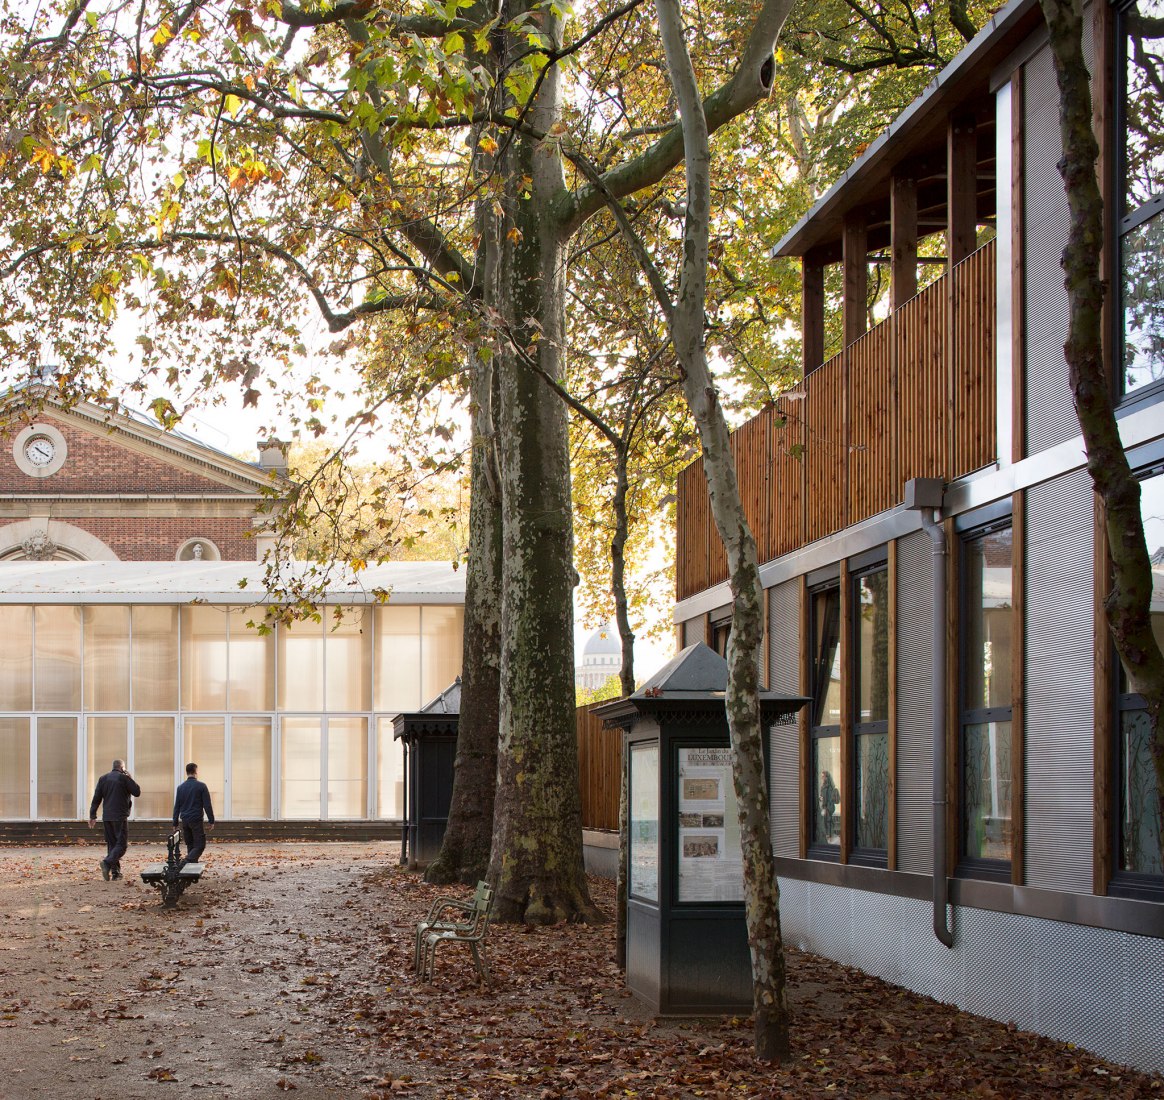 Wooden nursery in Luxembourg Gardens by Djuric Tardio Architectes. Photograph by Clément Guillaume